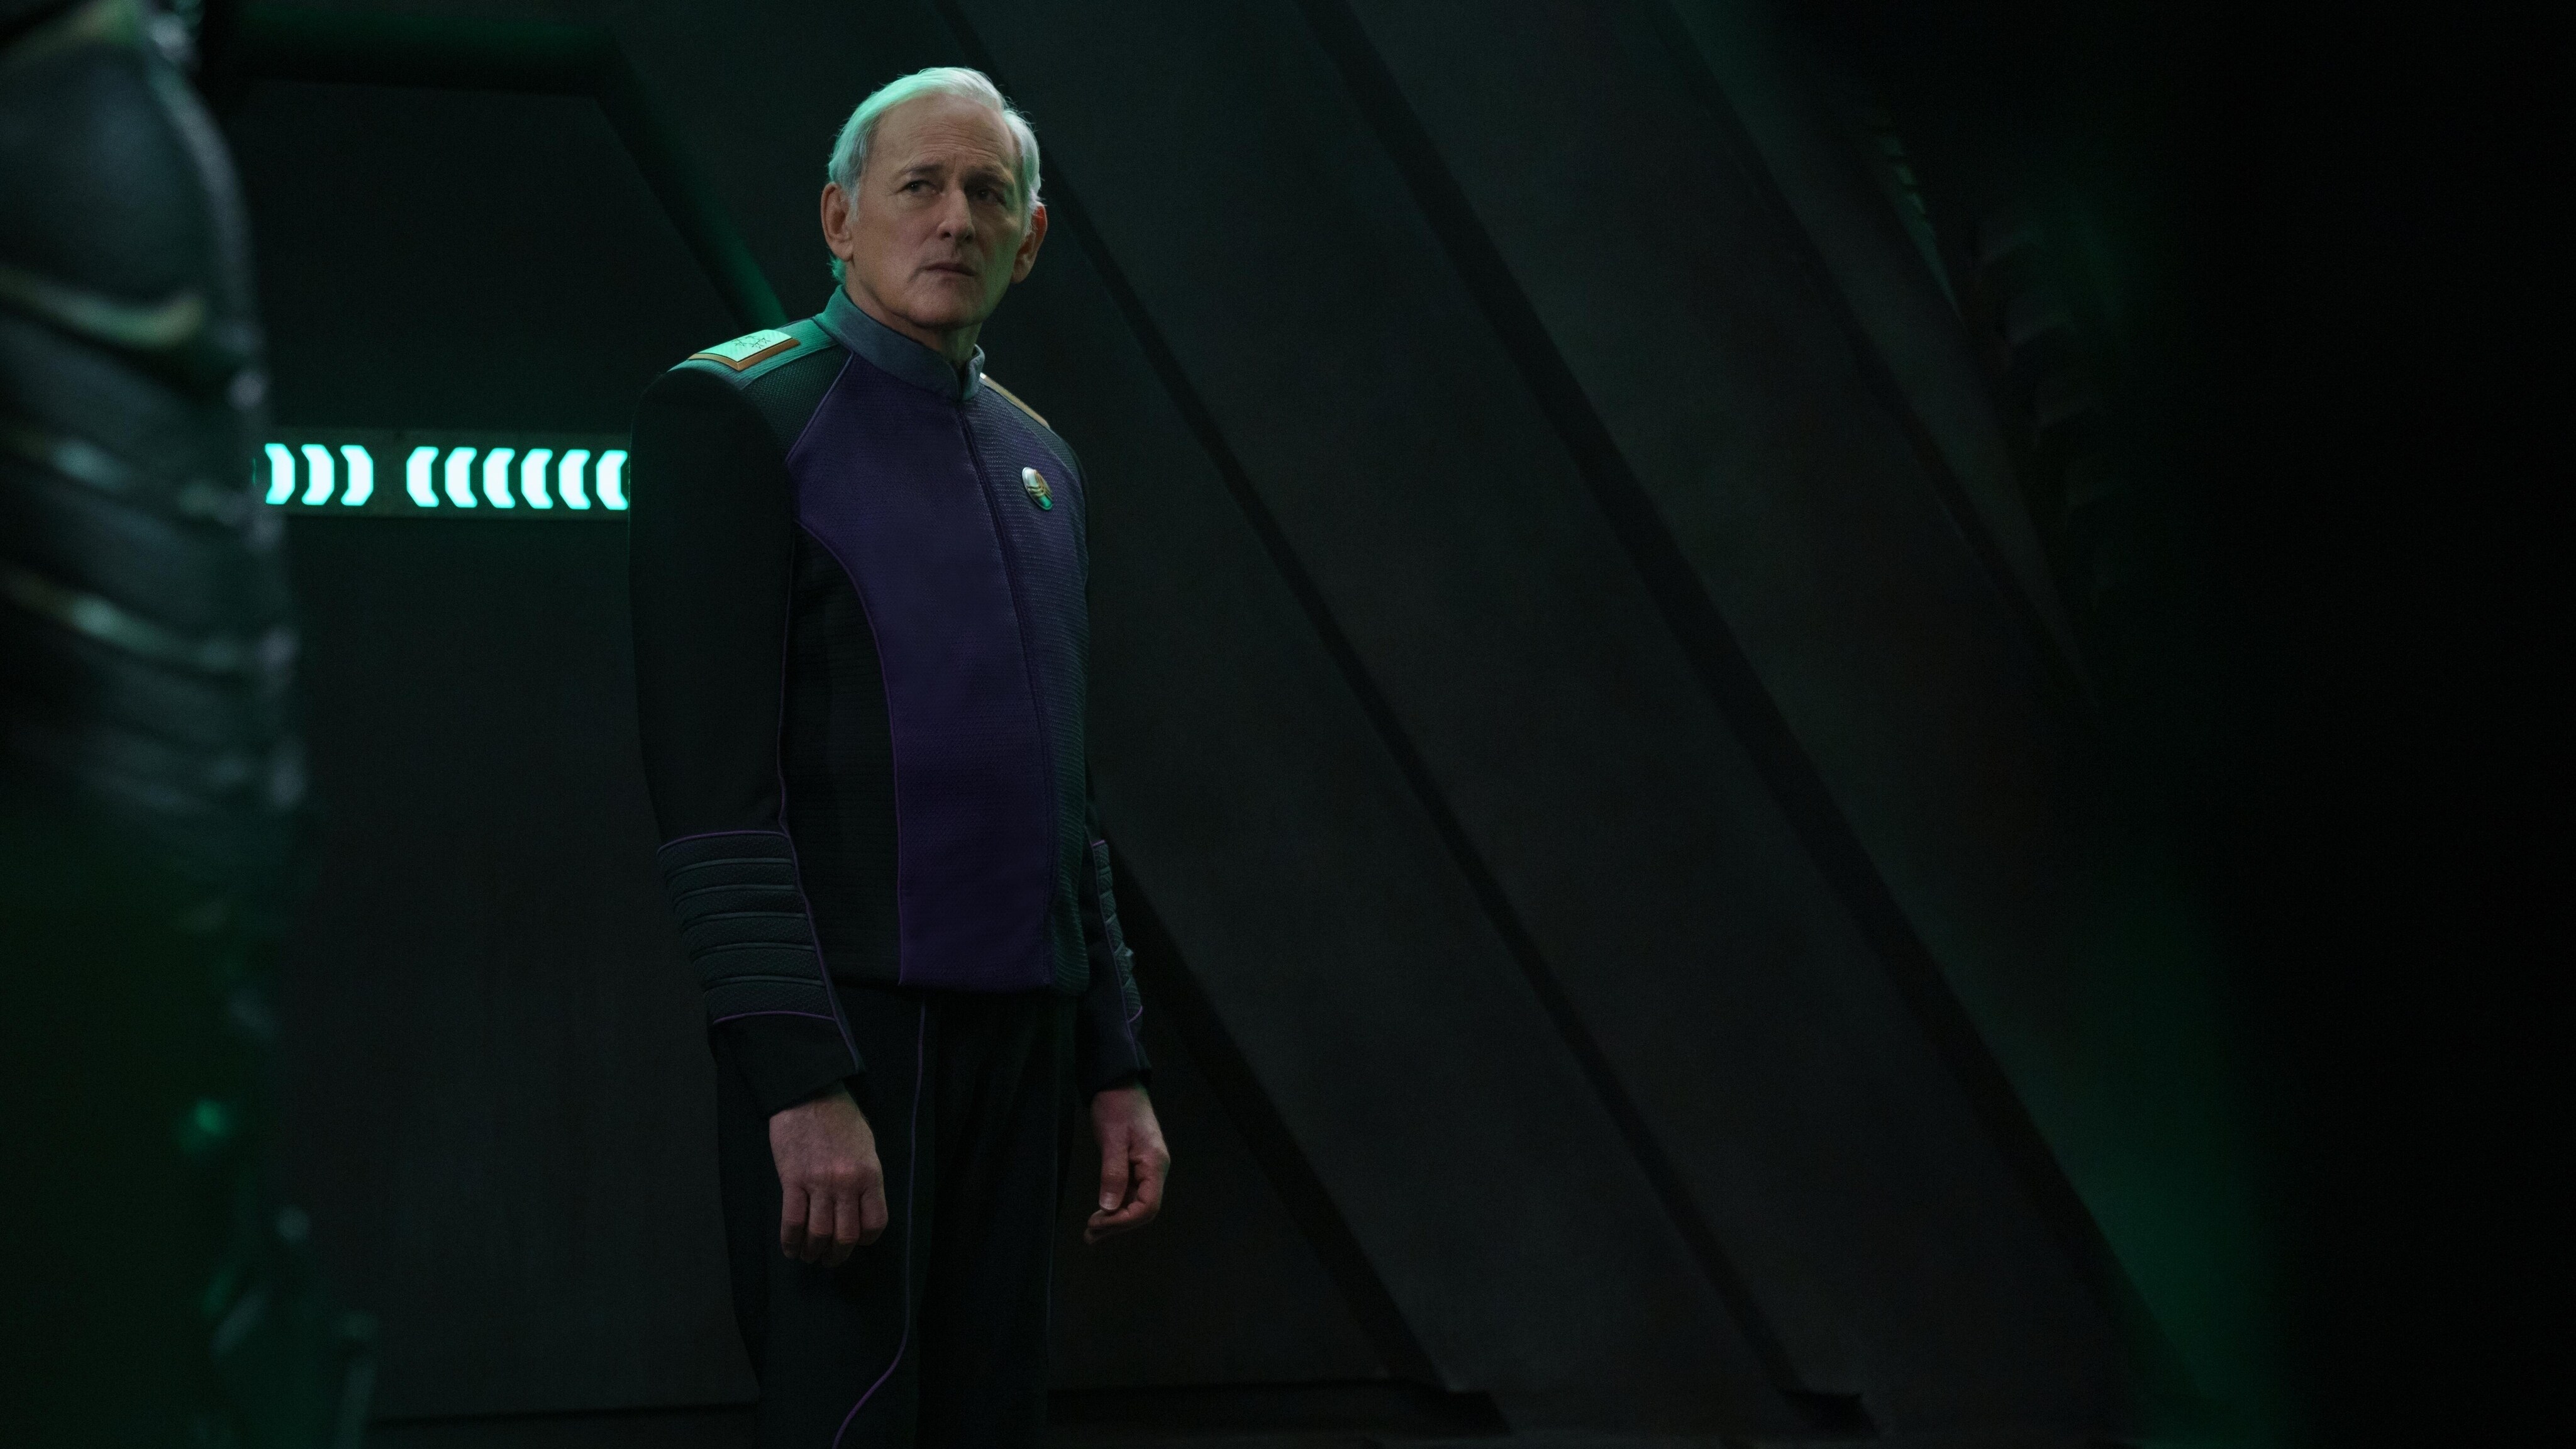 The Orville: New Horizons -- “Gently Falling Rain” - Episode 304 -- The Orville crew leads a Union delegation to sign a peace treaty with the Krill. Admiral Halsey (Victor Garber), shown. (Photo by: Michael Desmond/Hulu)